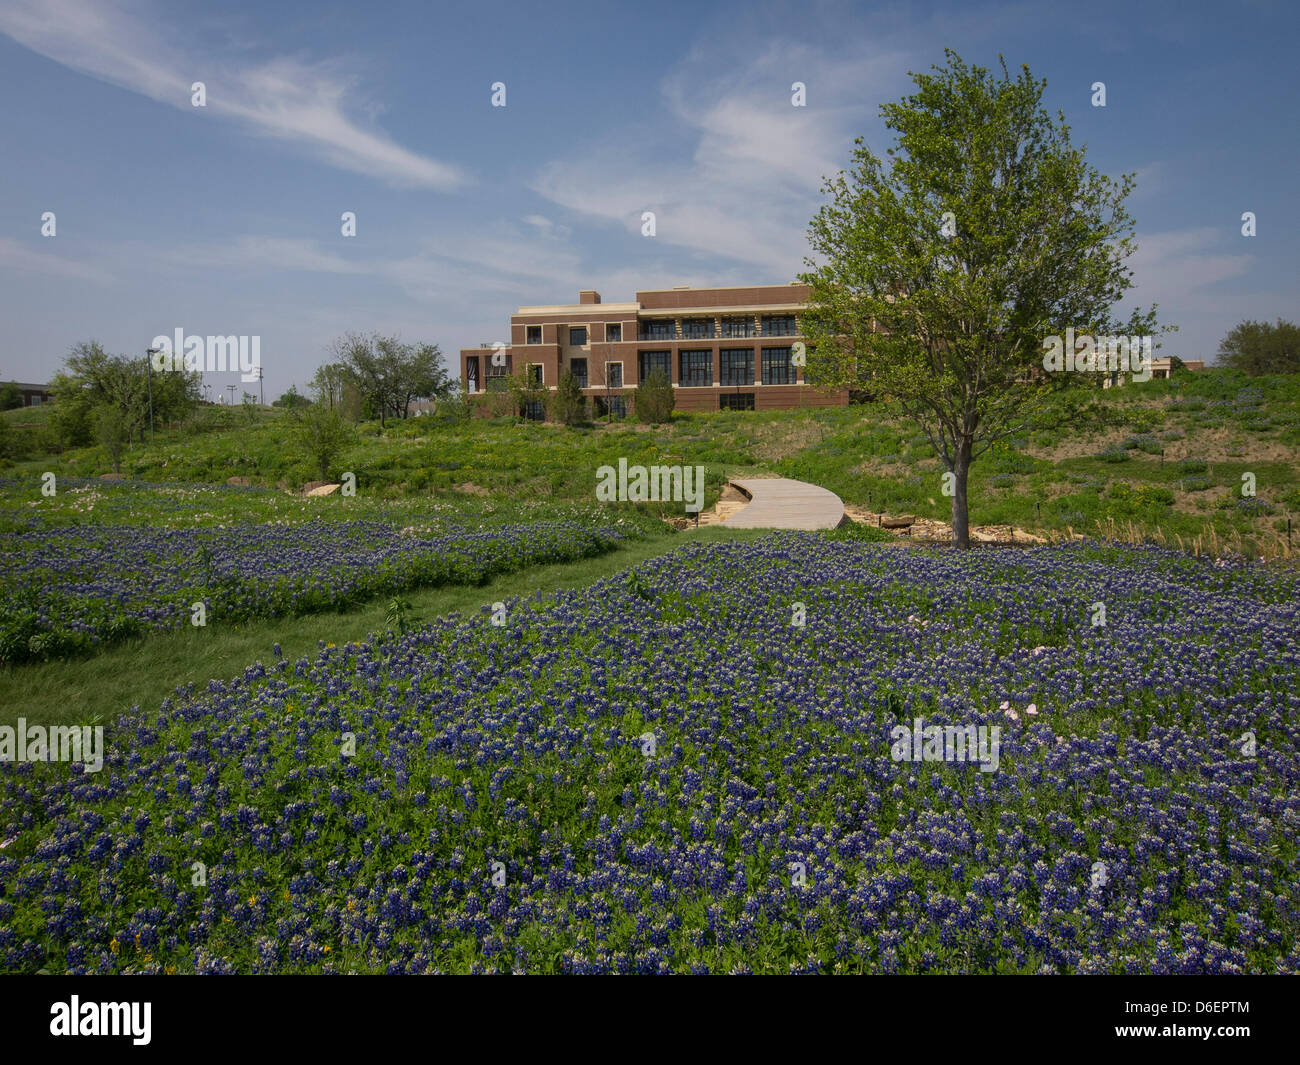 At The George W Bush Presidential Library and Museum on the SMU campus,  a field of native Texas wildflowers bloom. Especially the Texas Bluebonnet, state flower of Texas. Stock Photo